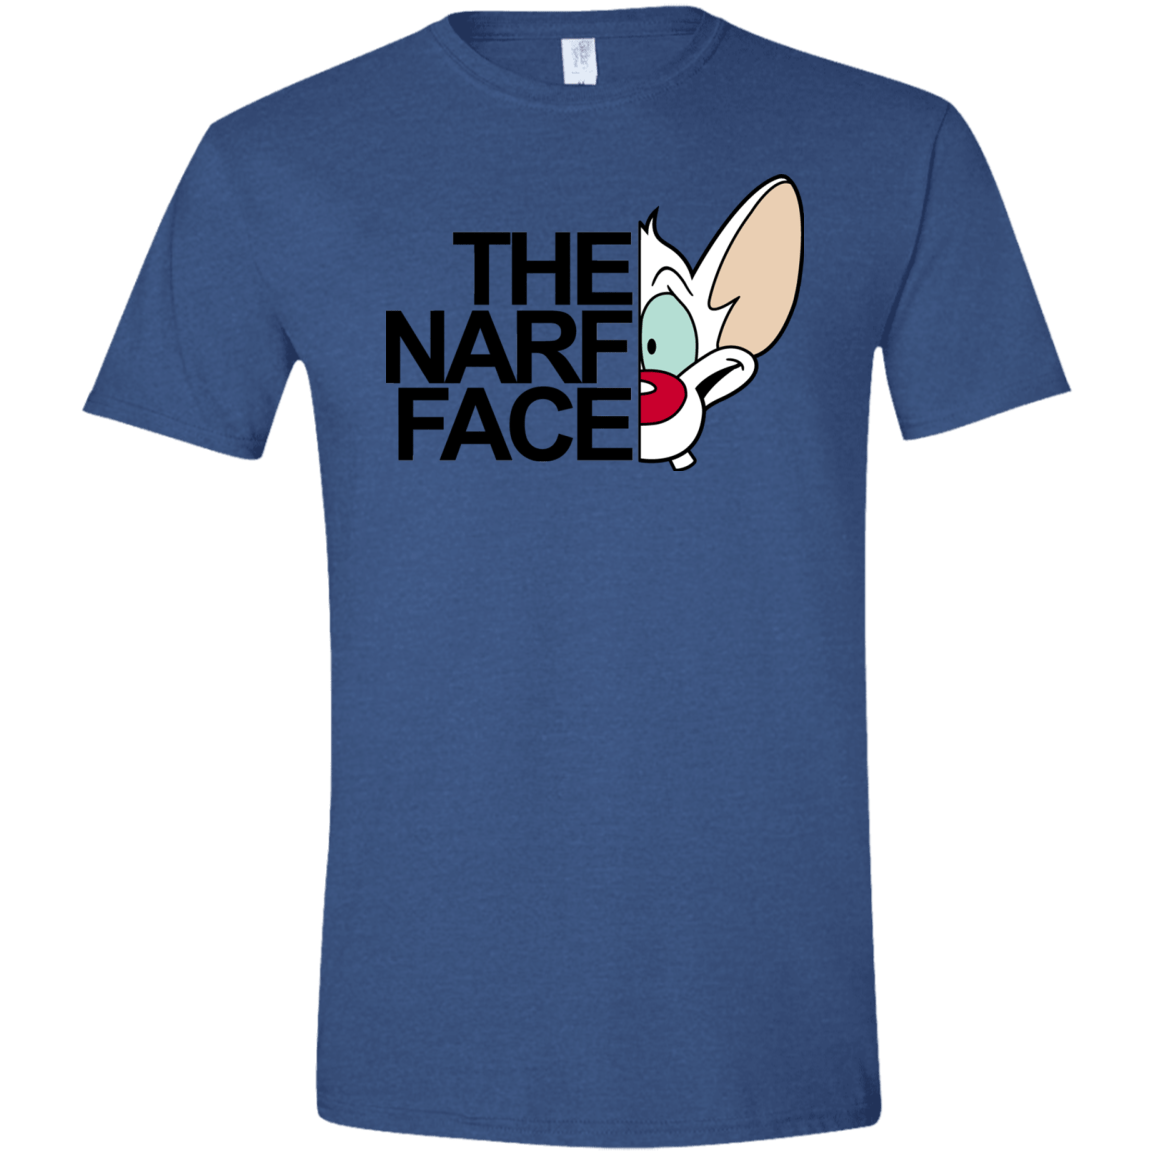 The Narf Face Men's Semi-Fitted Softstyle